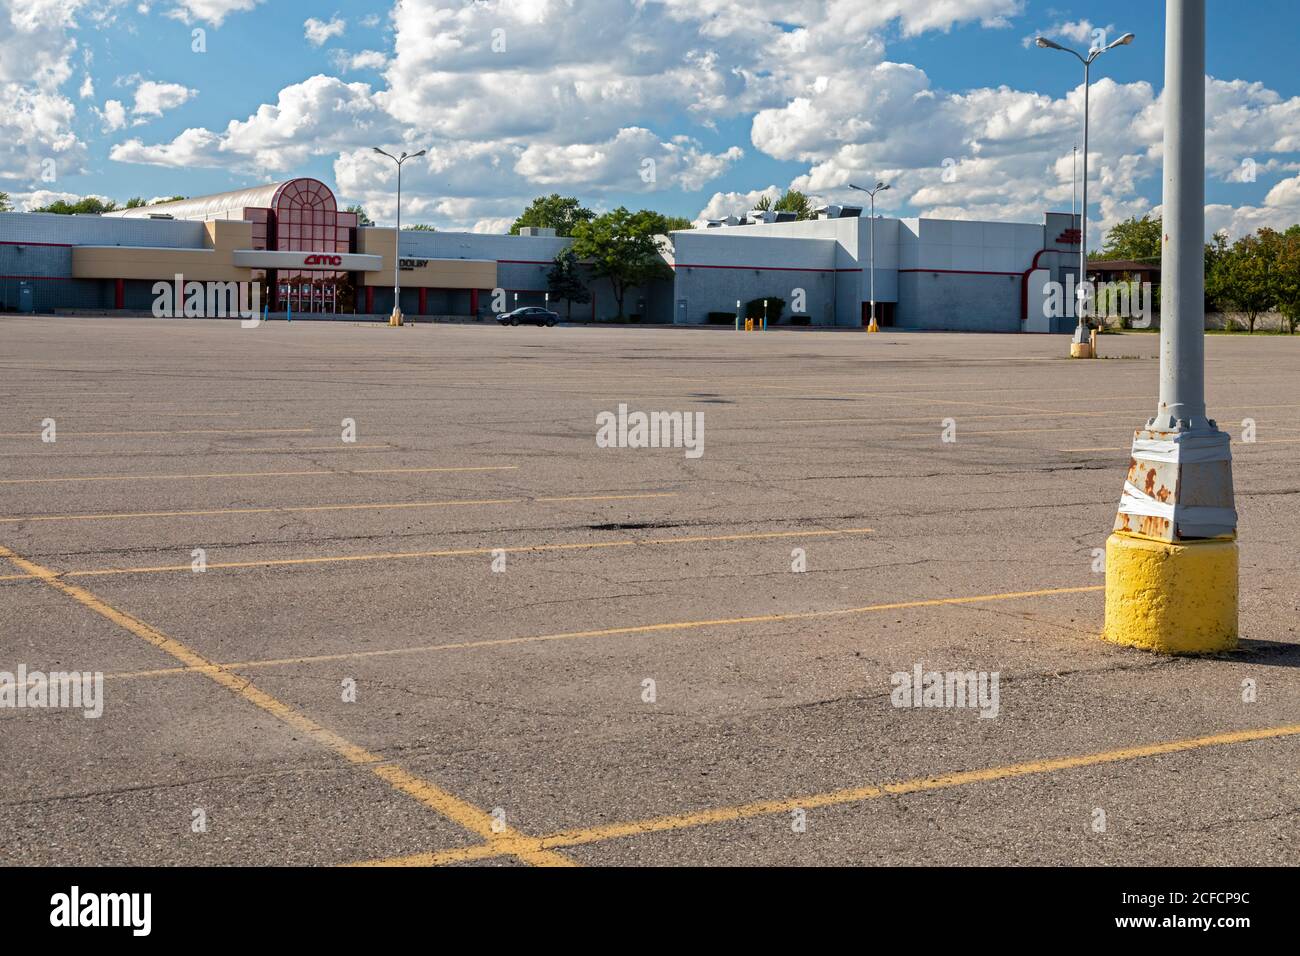 Clinton Township, Michigan, USA. 4th Sep, 2020. The parking lot is empty in front of the AMC Star Gratiot 15 movie theaters, closed under State of Emergency orders from Michigan Governor Gretchen Whitmer during the coronavirus pandemic. Credit: Jim West/Alamy Live News Stock Photo